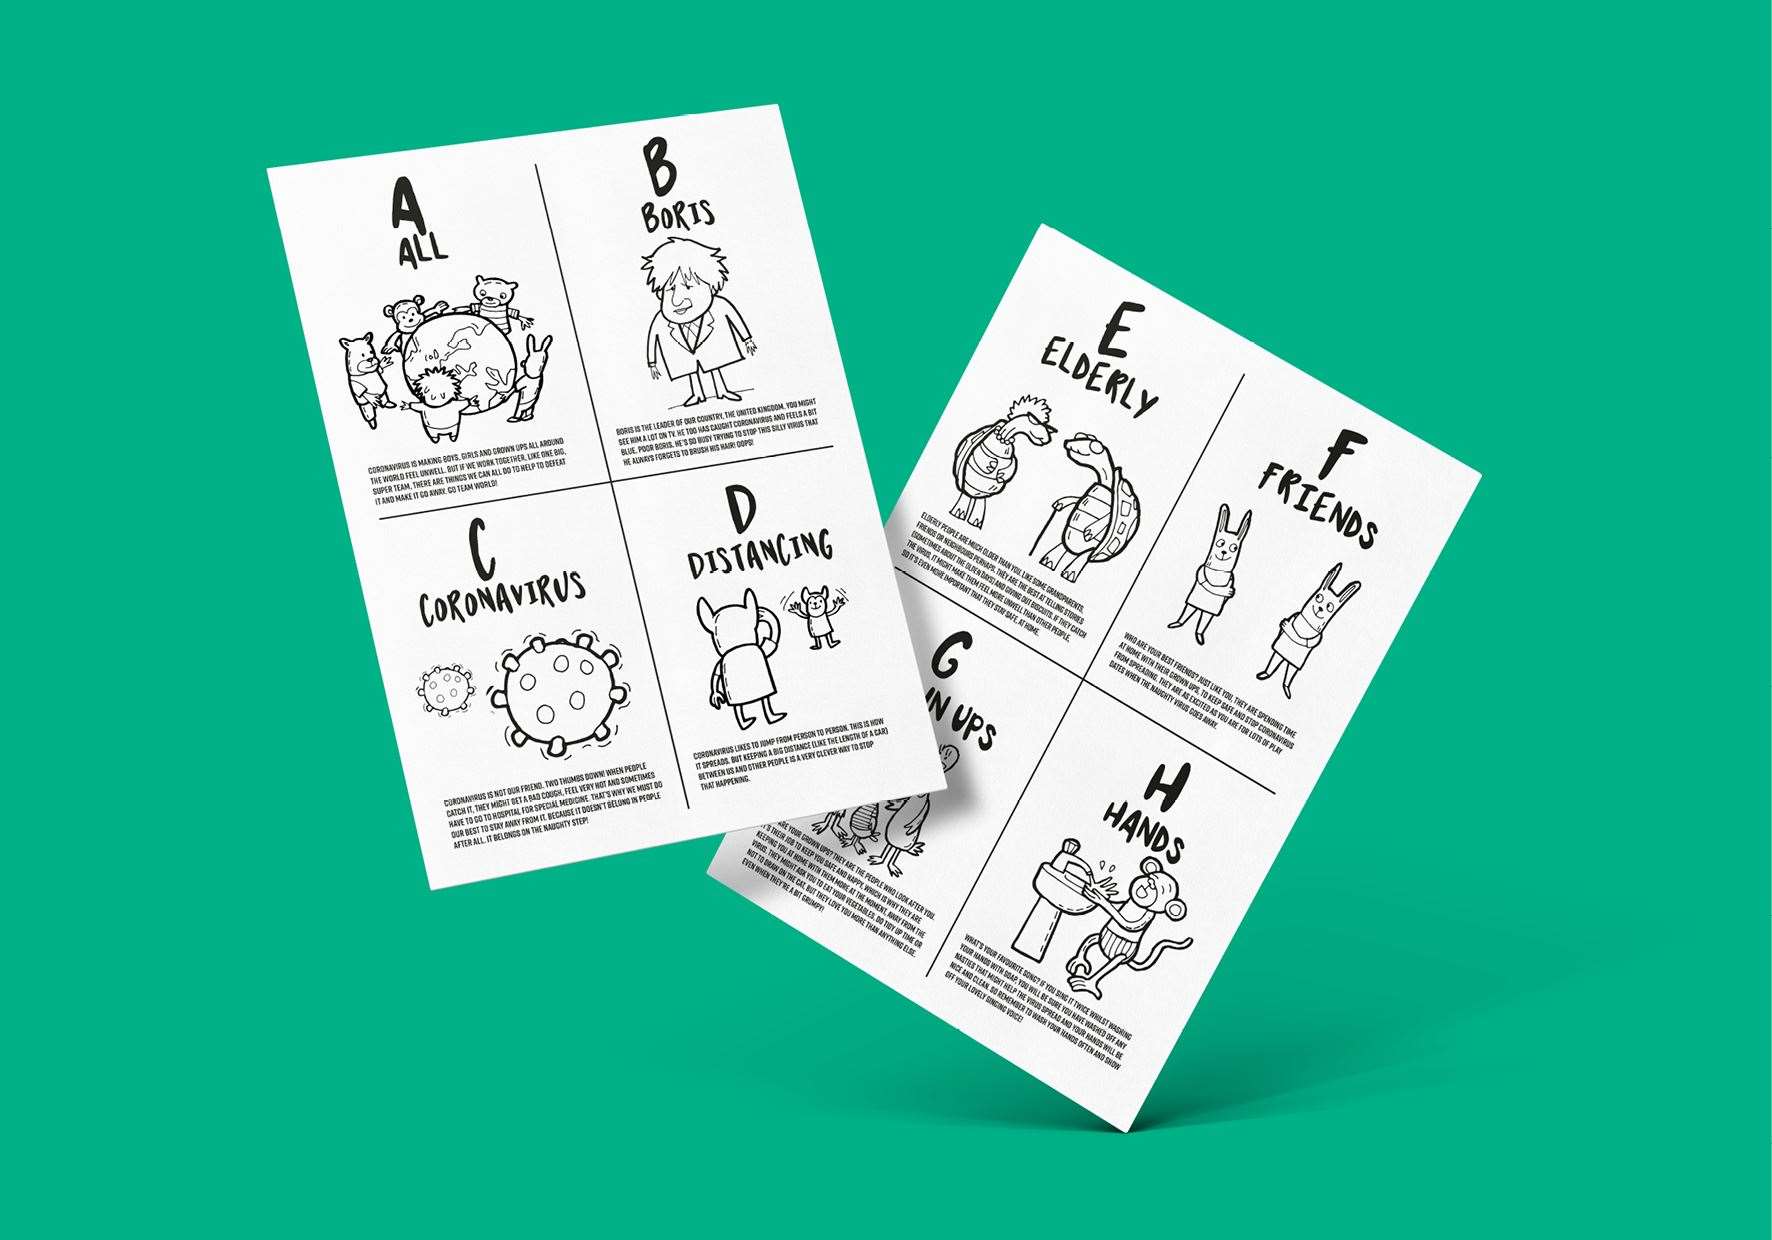 The new alphabet can be downloaded and printed to decorate